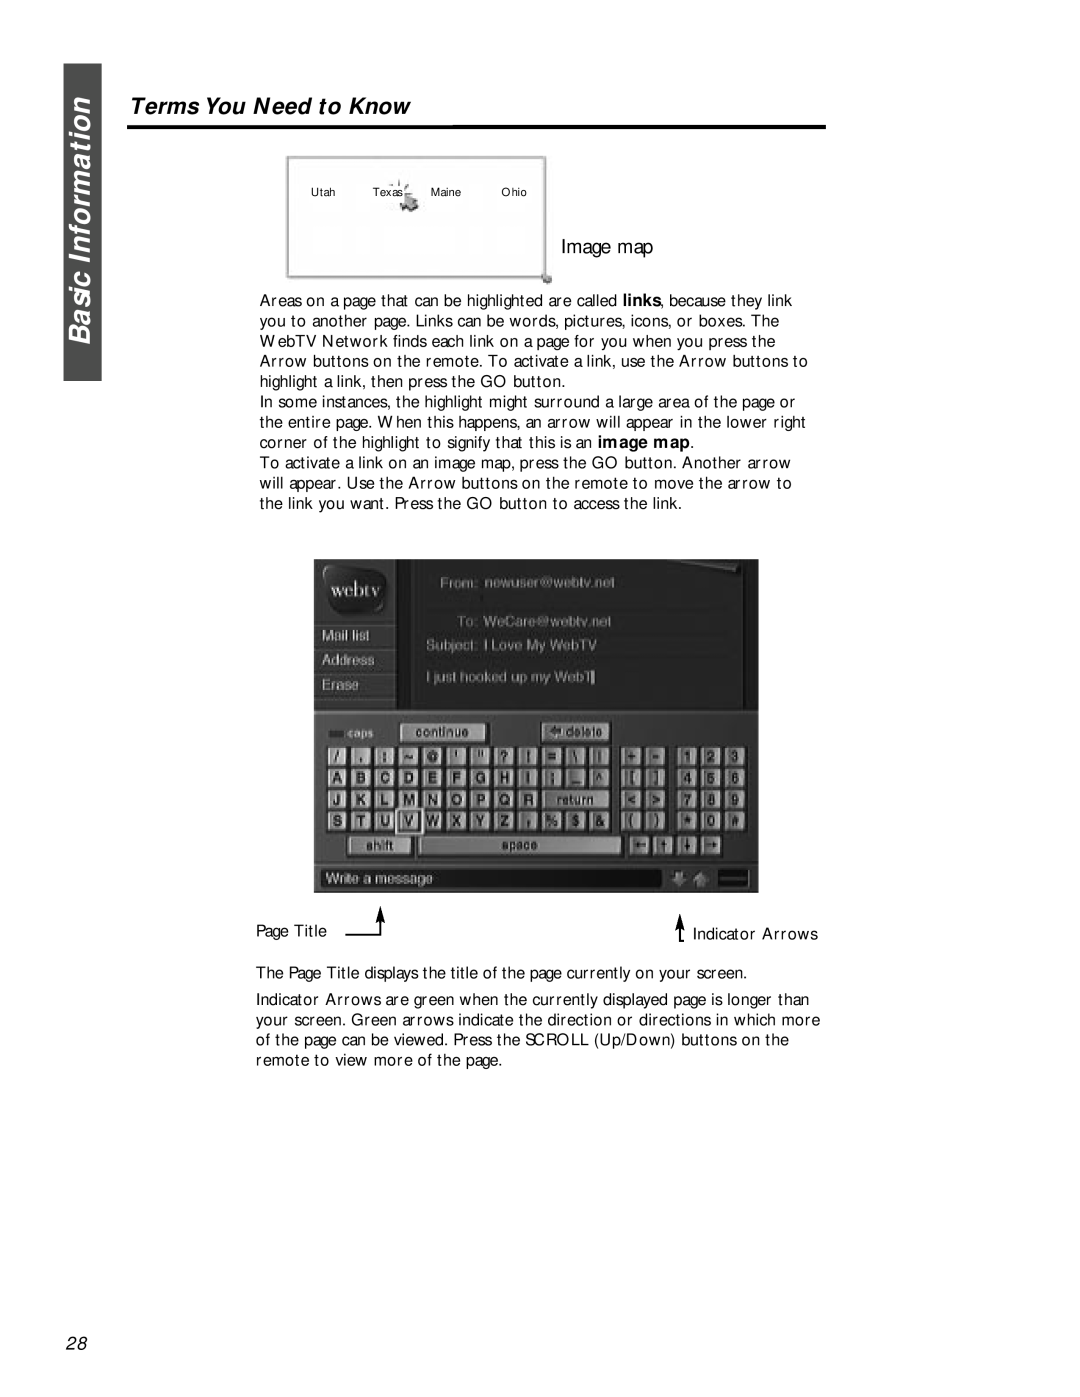 Philips MAT972KB QUG owner manual Terms You Need to Know, Basic Information, Image map 